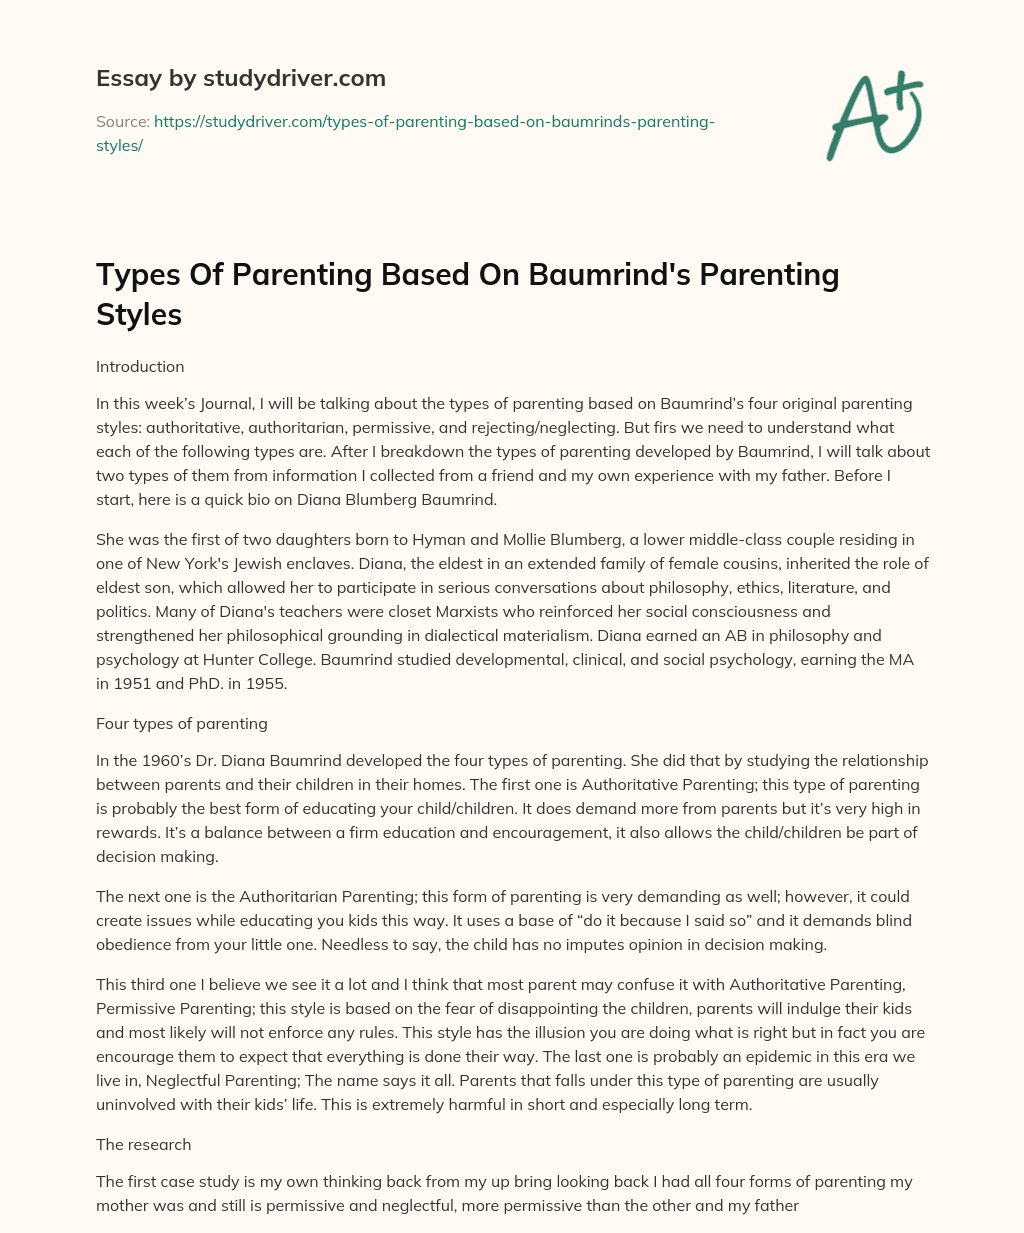 Types of Parenting Based on Baumrind’s Parenting Styles essay